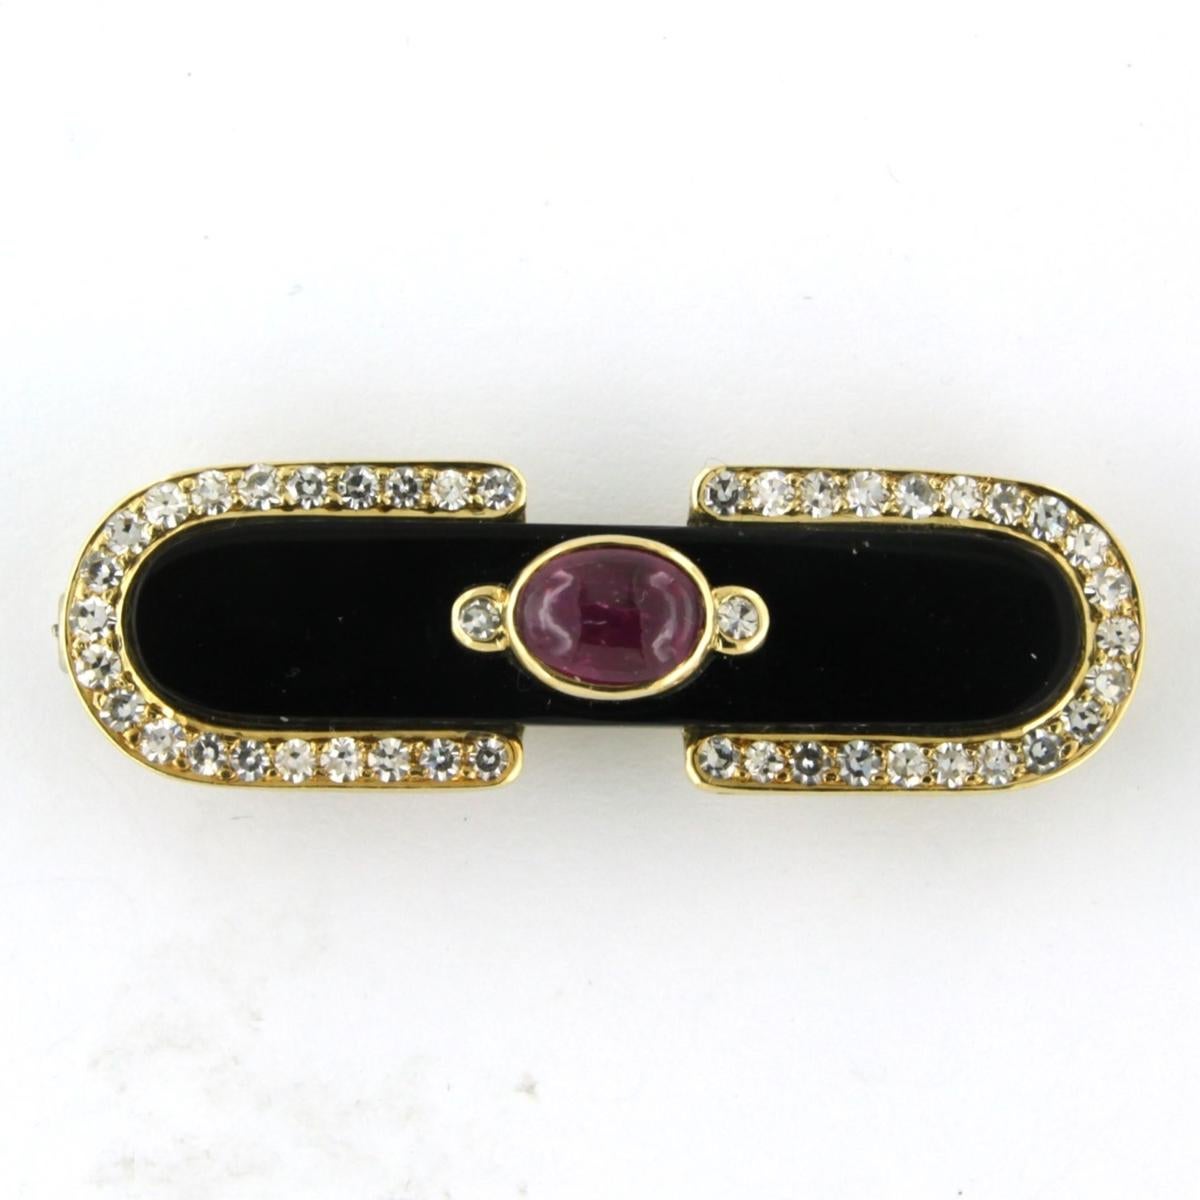 18 kt yellow gold brooch set with ruby ​​tot. 0.80ct, onyx and single cut diamond to. 0.90 ct - F/G - VS/SI

detailed description:

The size of the brooch is approximately 4.1 cm by 1.2 cm

weight: 7.4 grams

put with

- 1 x 3.6 cm x 7.7 mm flat bar